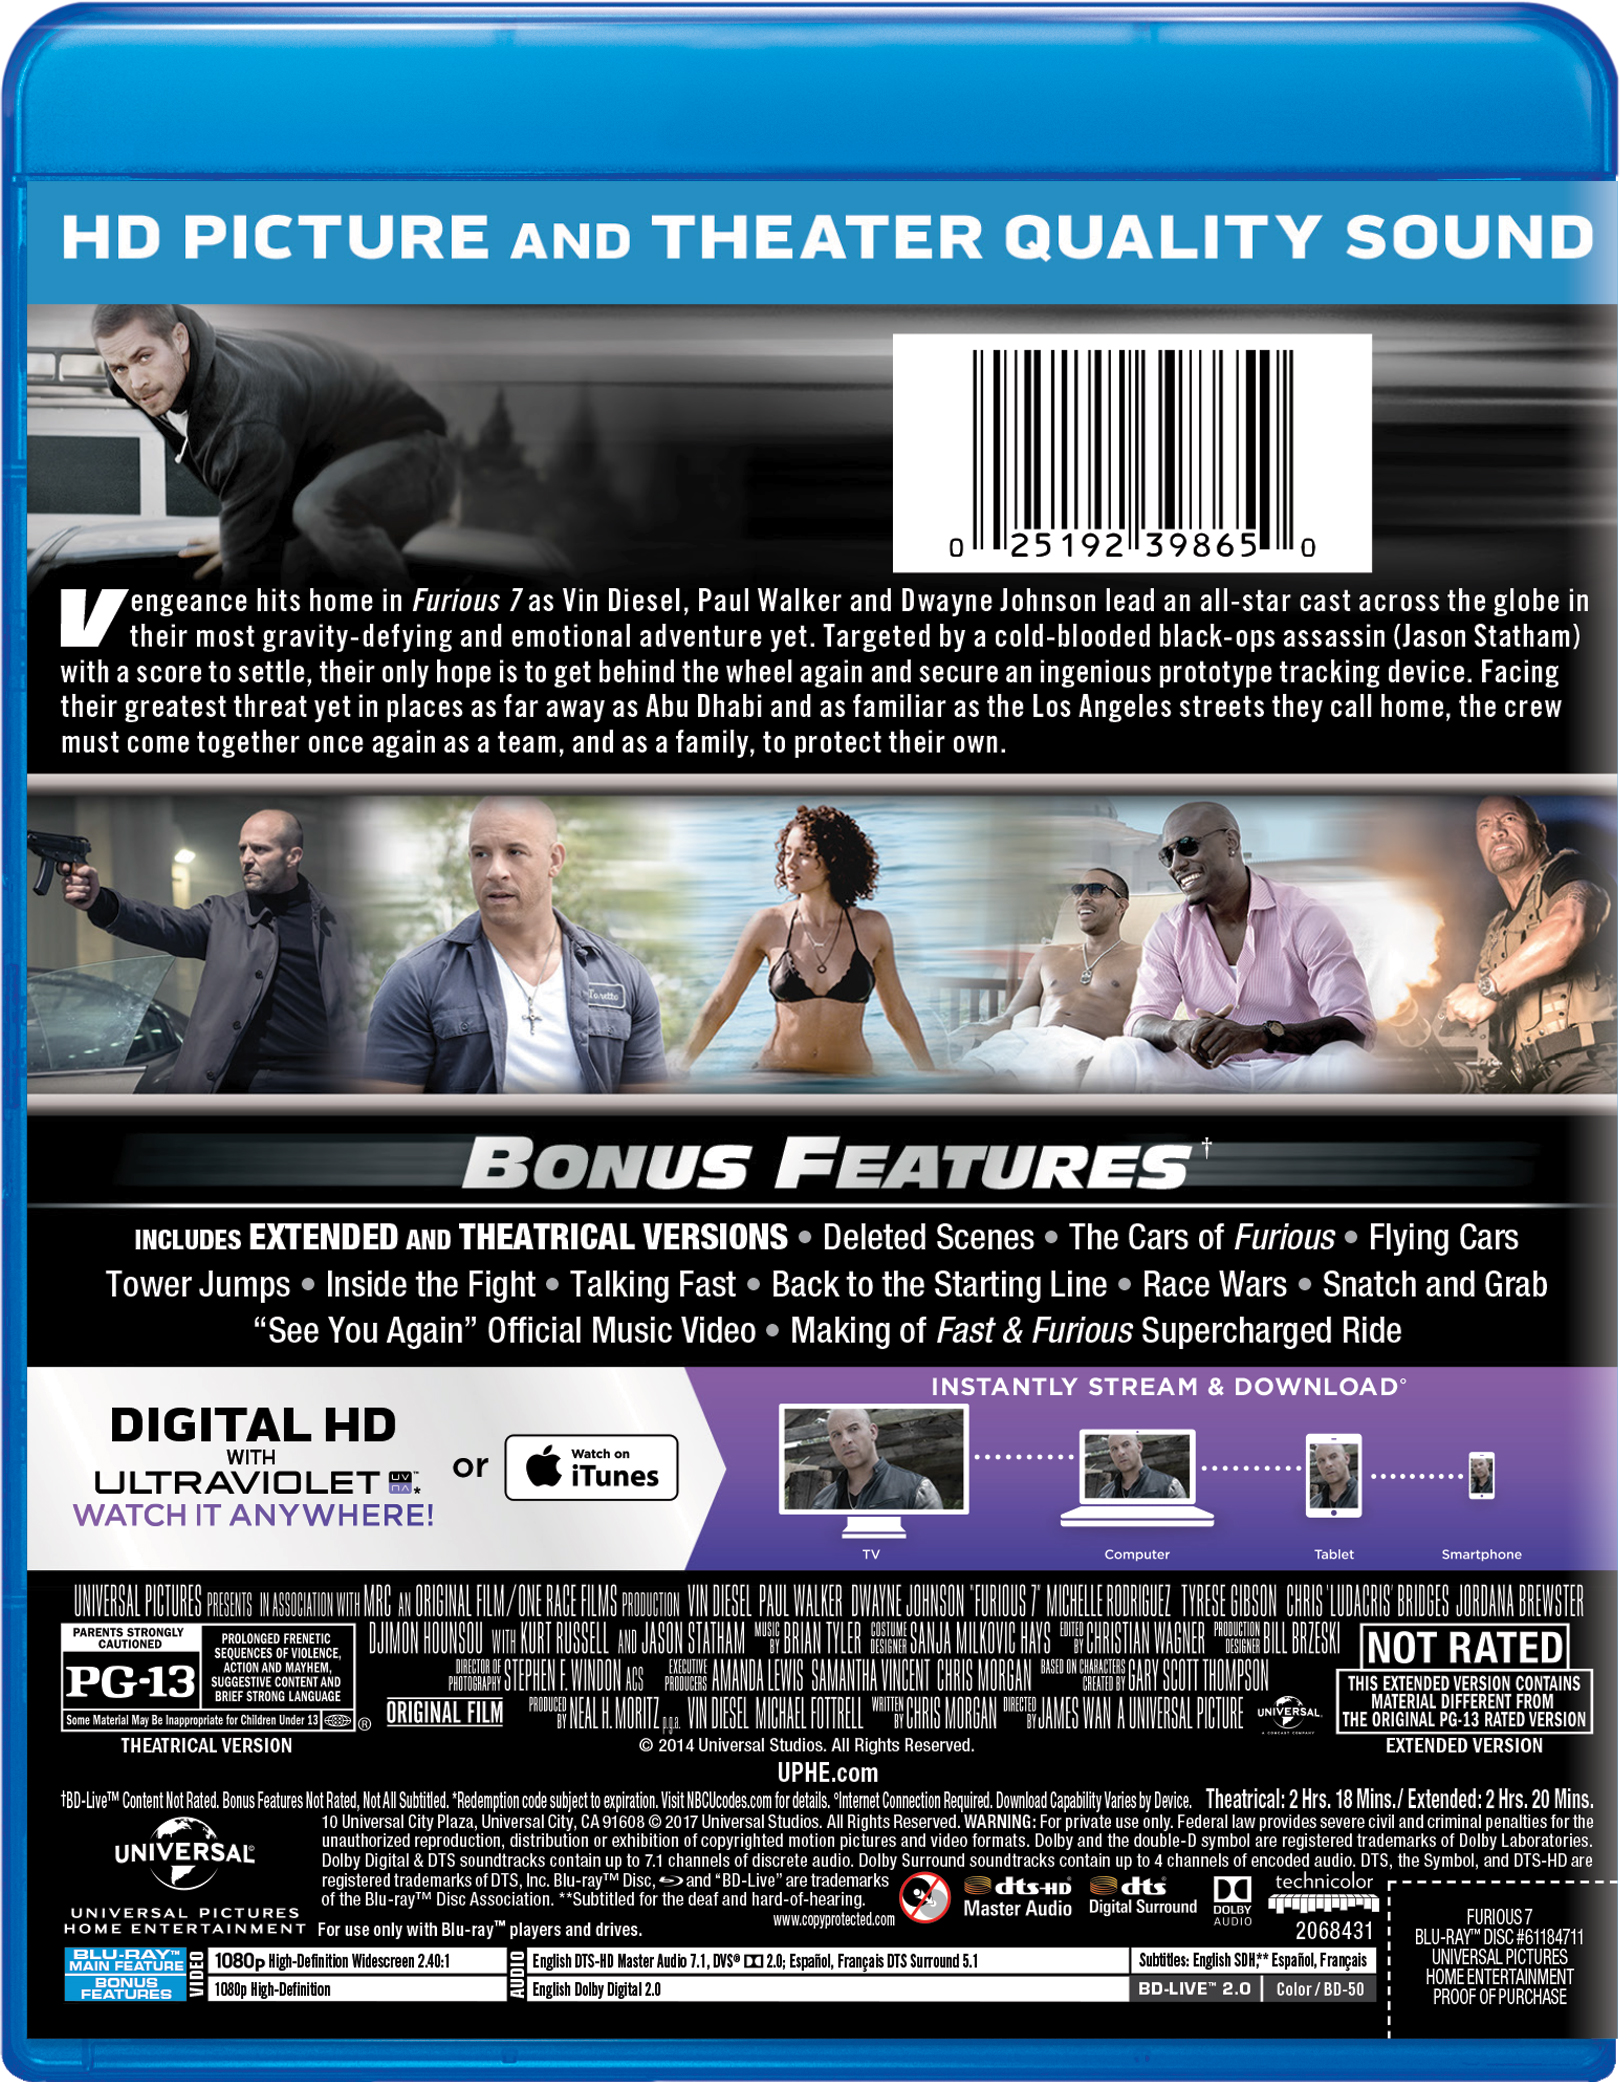 Fast and furious 9 download